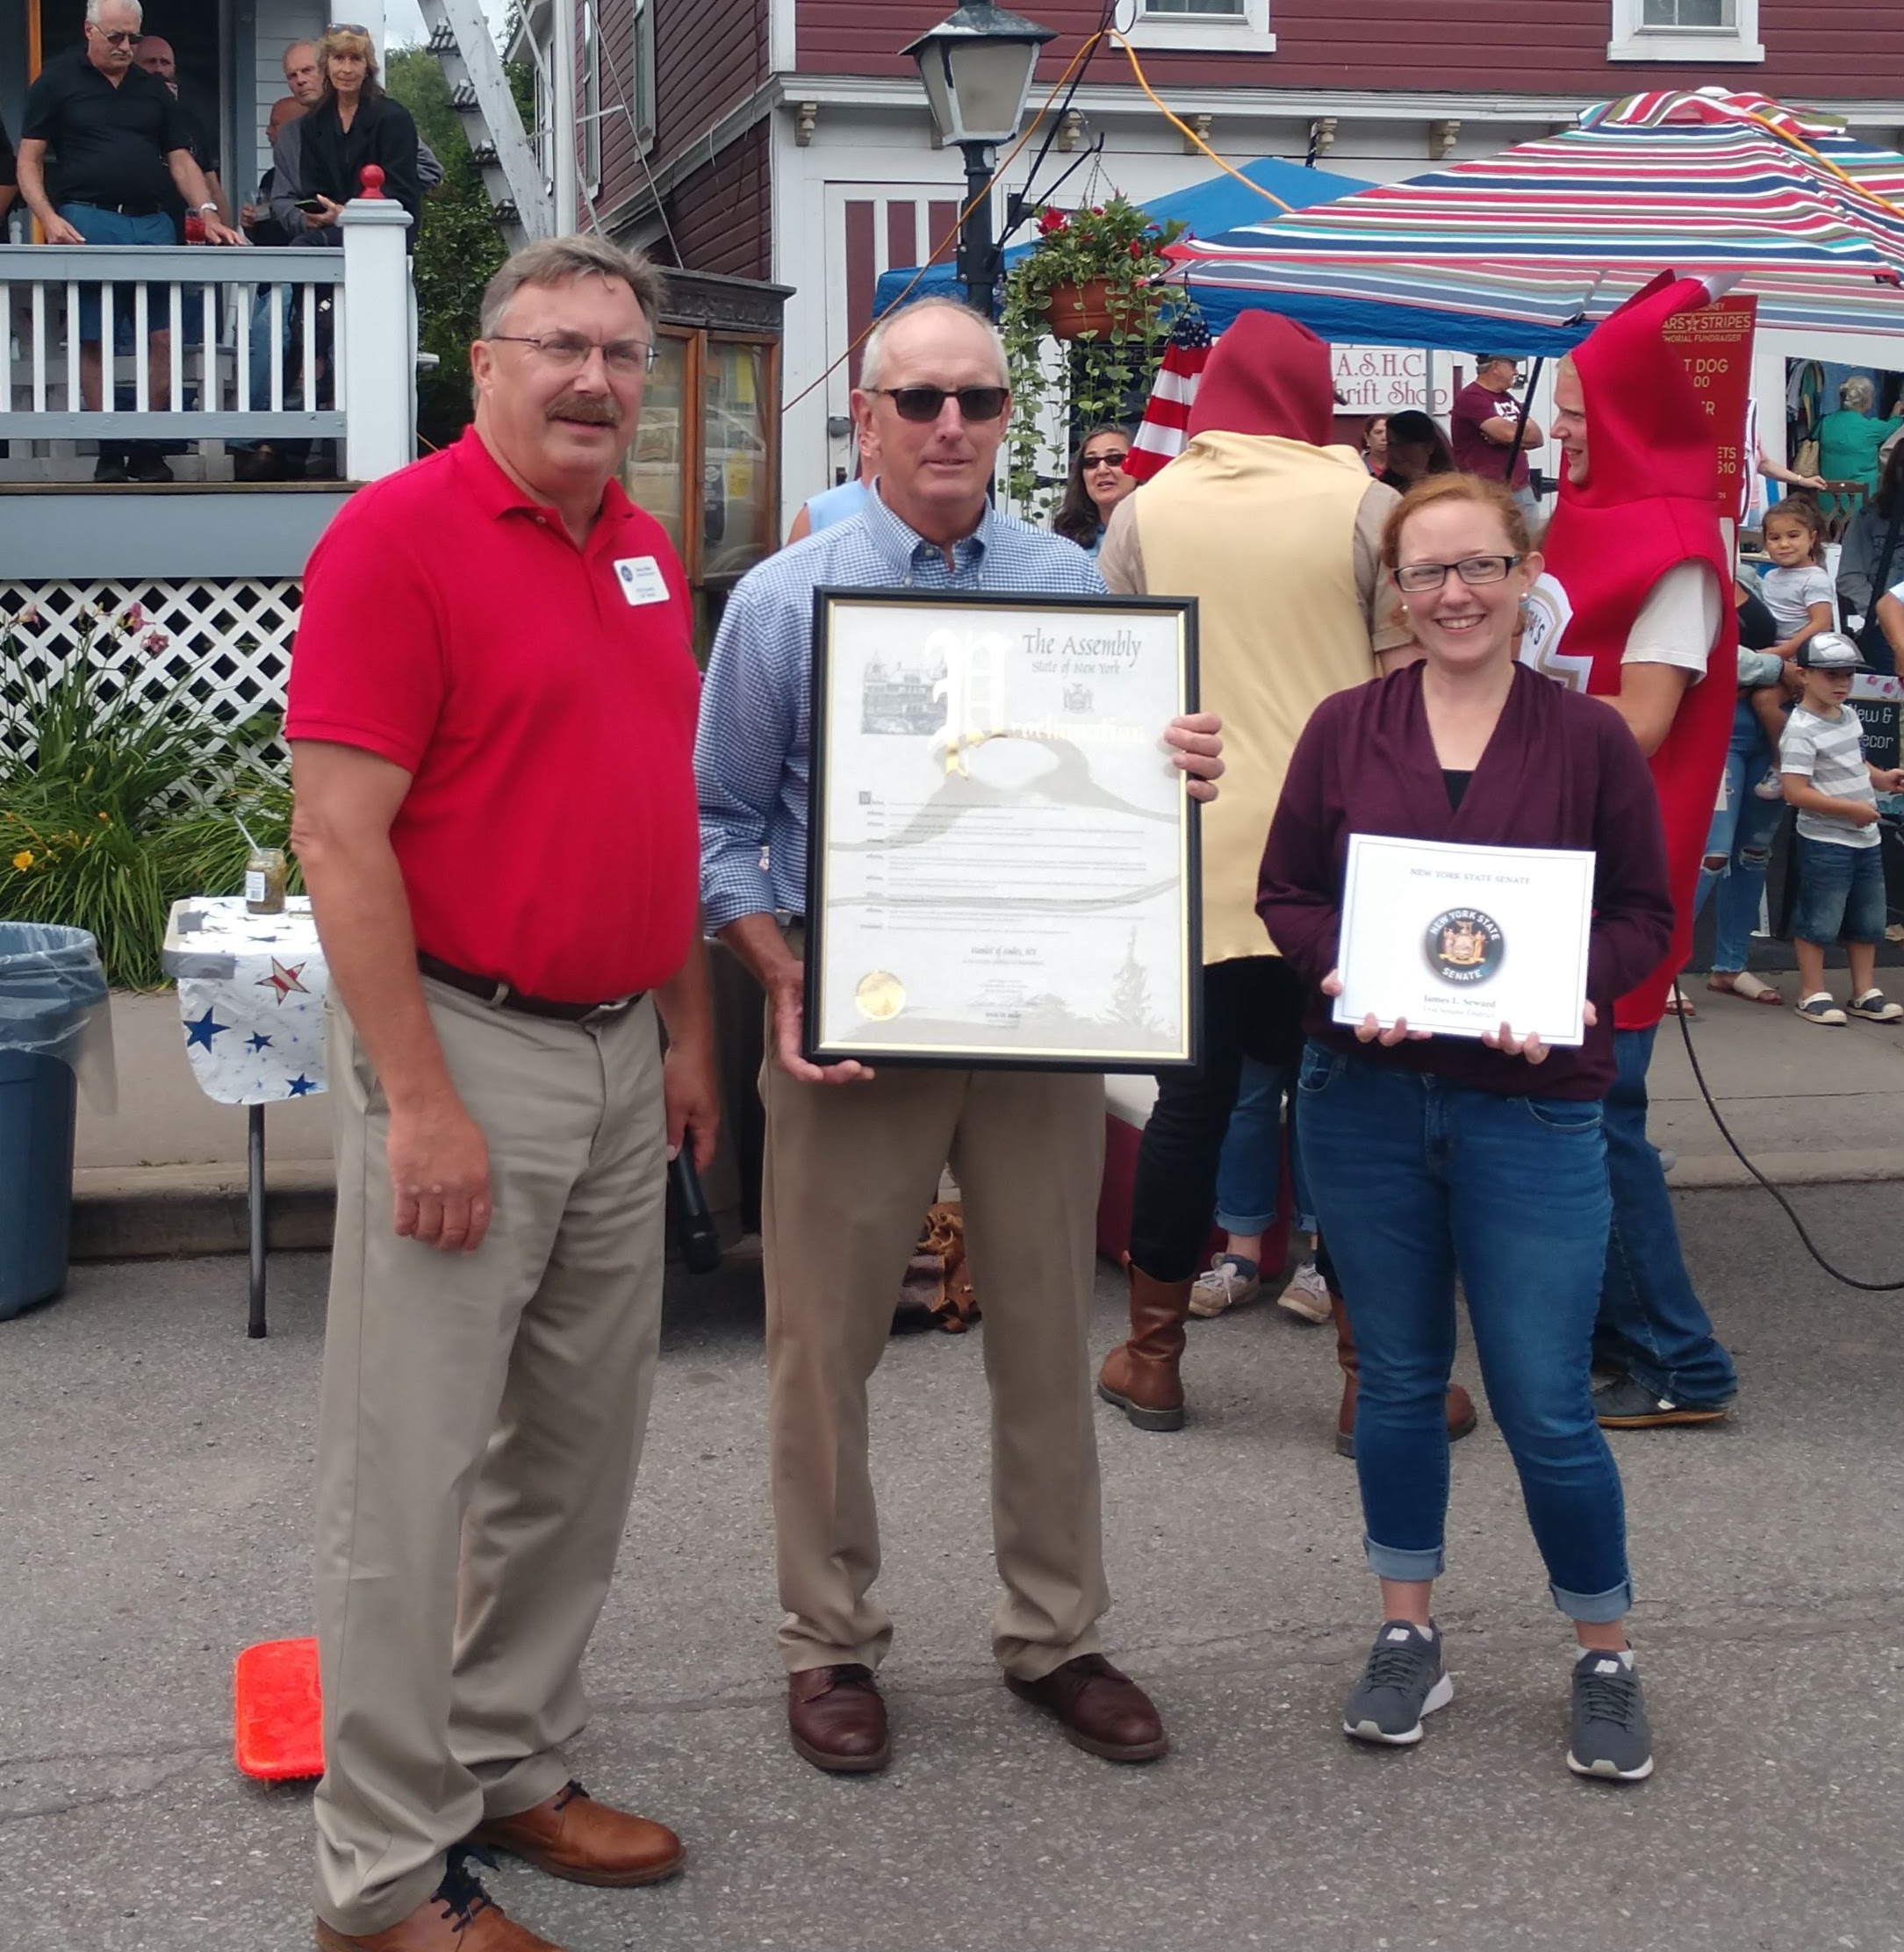 Pictured above: Assemblyman Brian Miller presents a state Assembly Proclamation in honor of the Town of Andes’ bicentennial to Town Supervisor Wayland “Bud” Gladstone and Town Clerk Kim